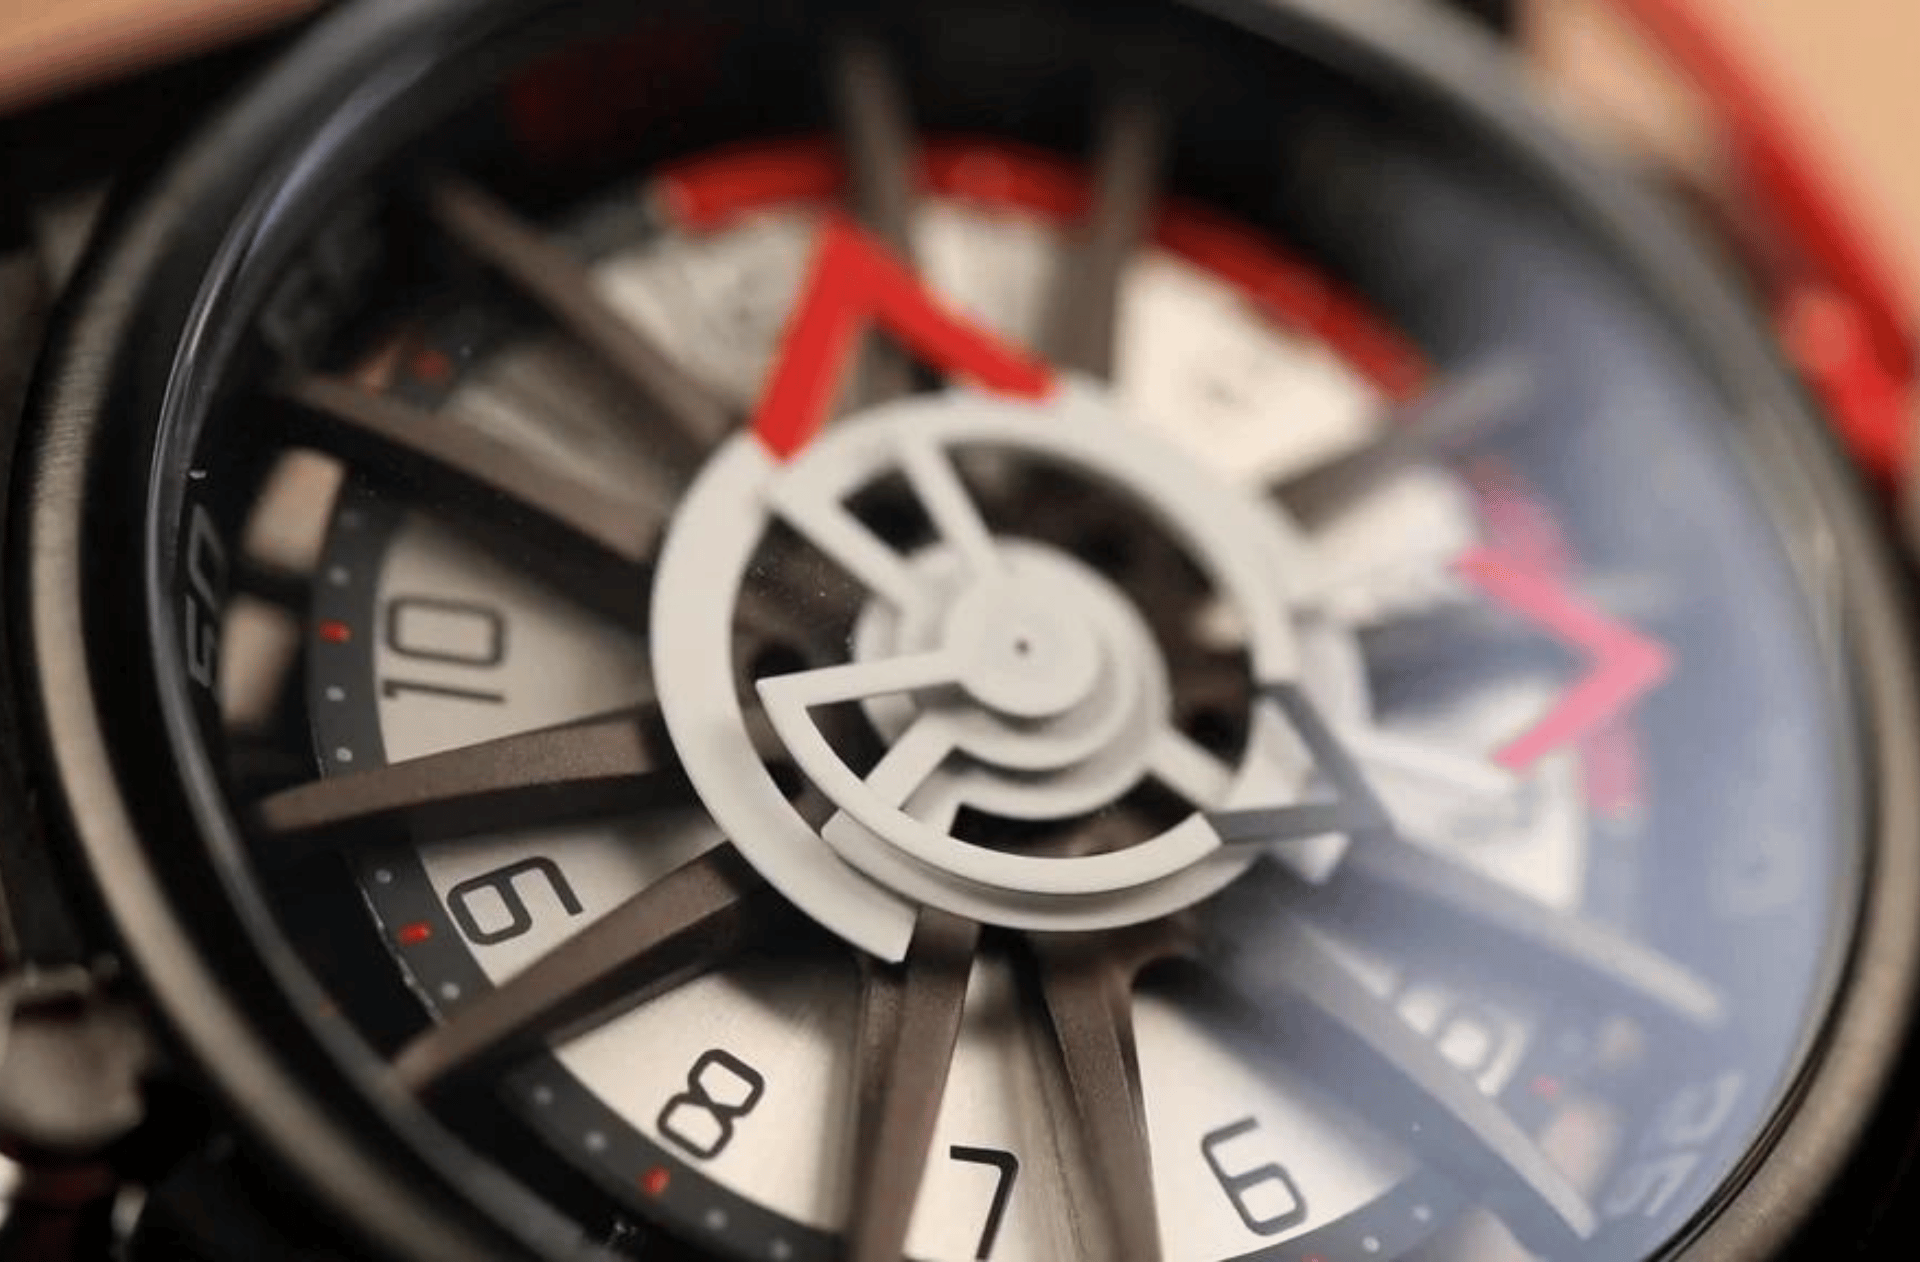 Mazzucato Sport Chronograph Watch Unboxing and Review